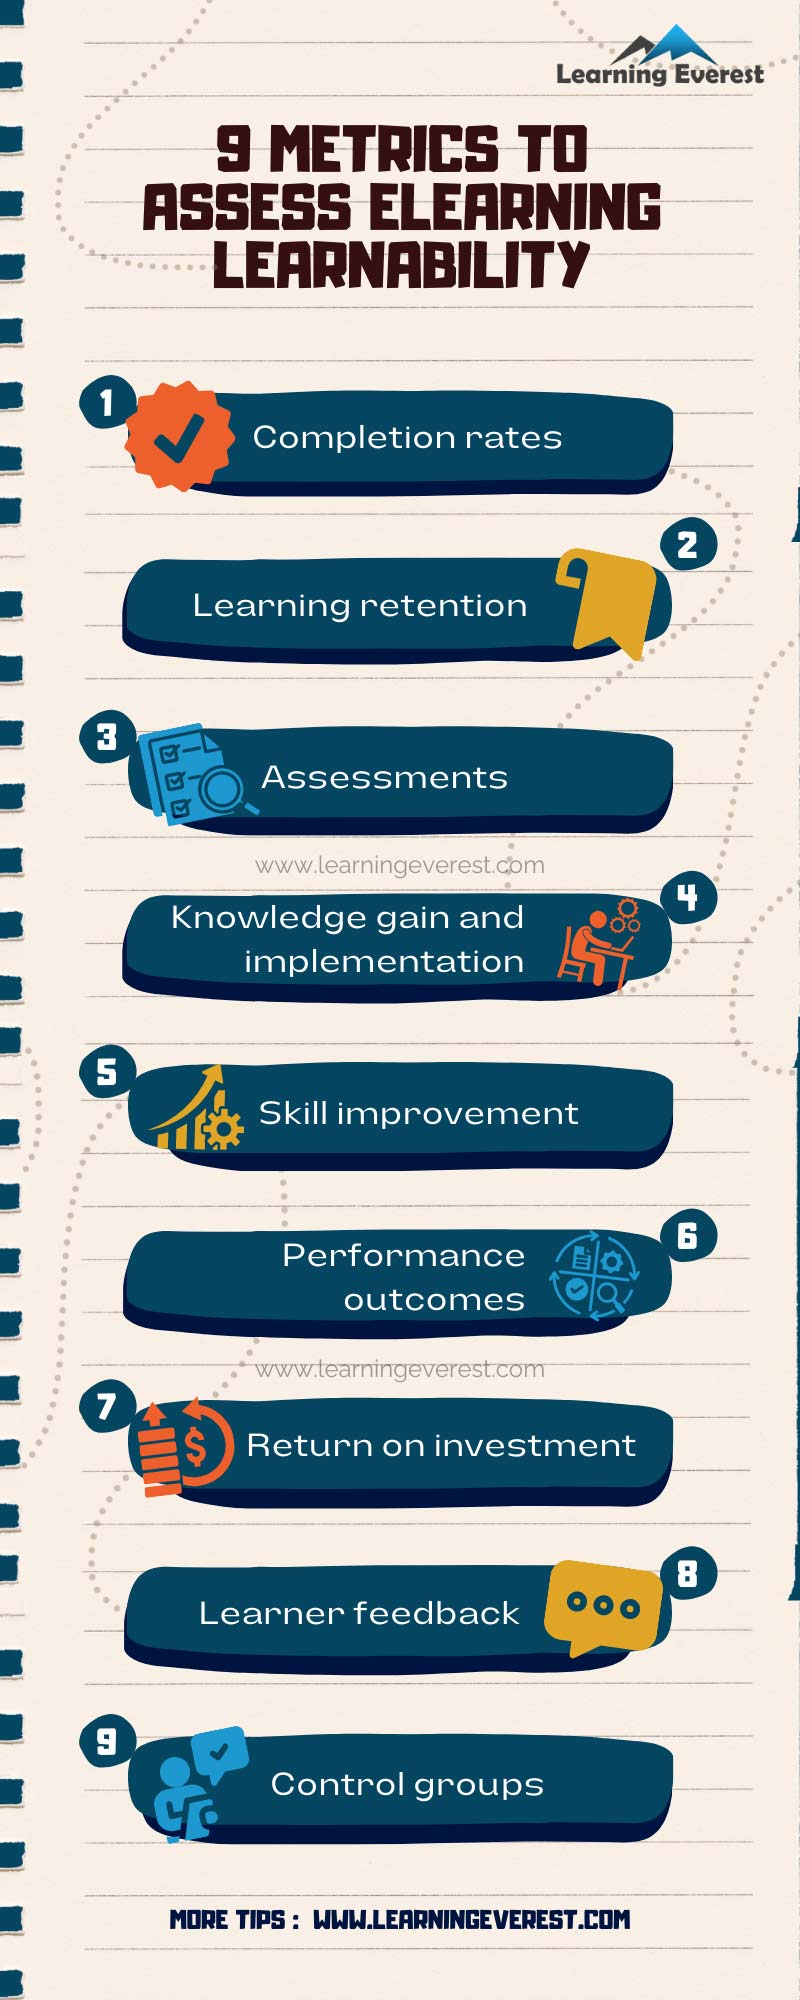 9 Metrics to Assess eLearning Learnability infographic